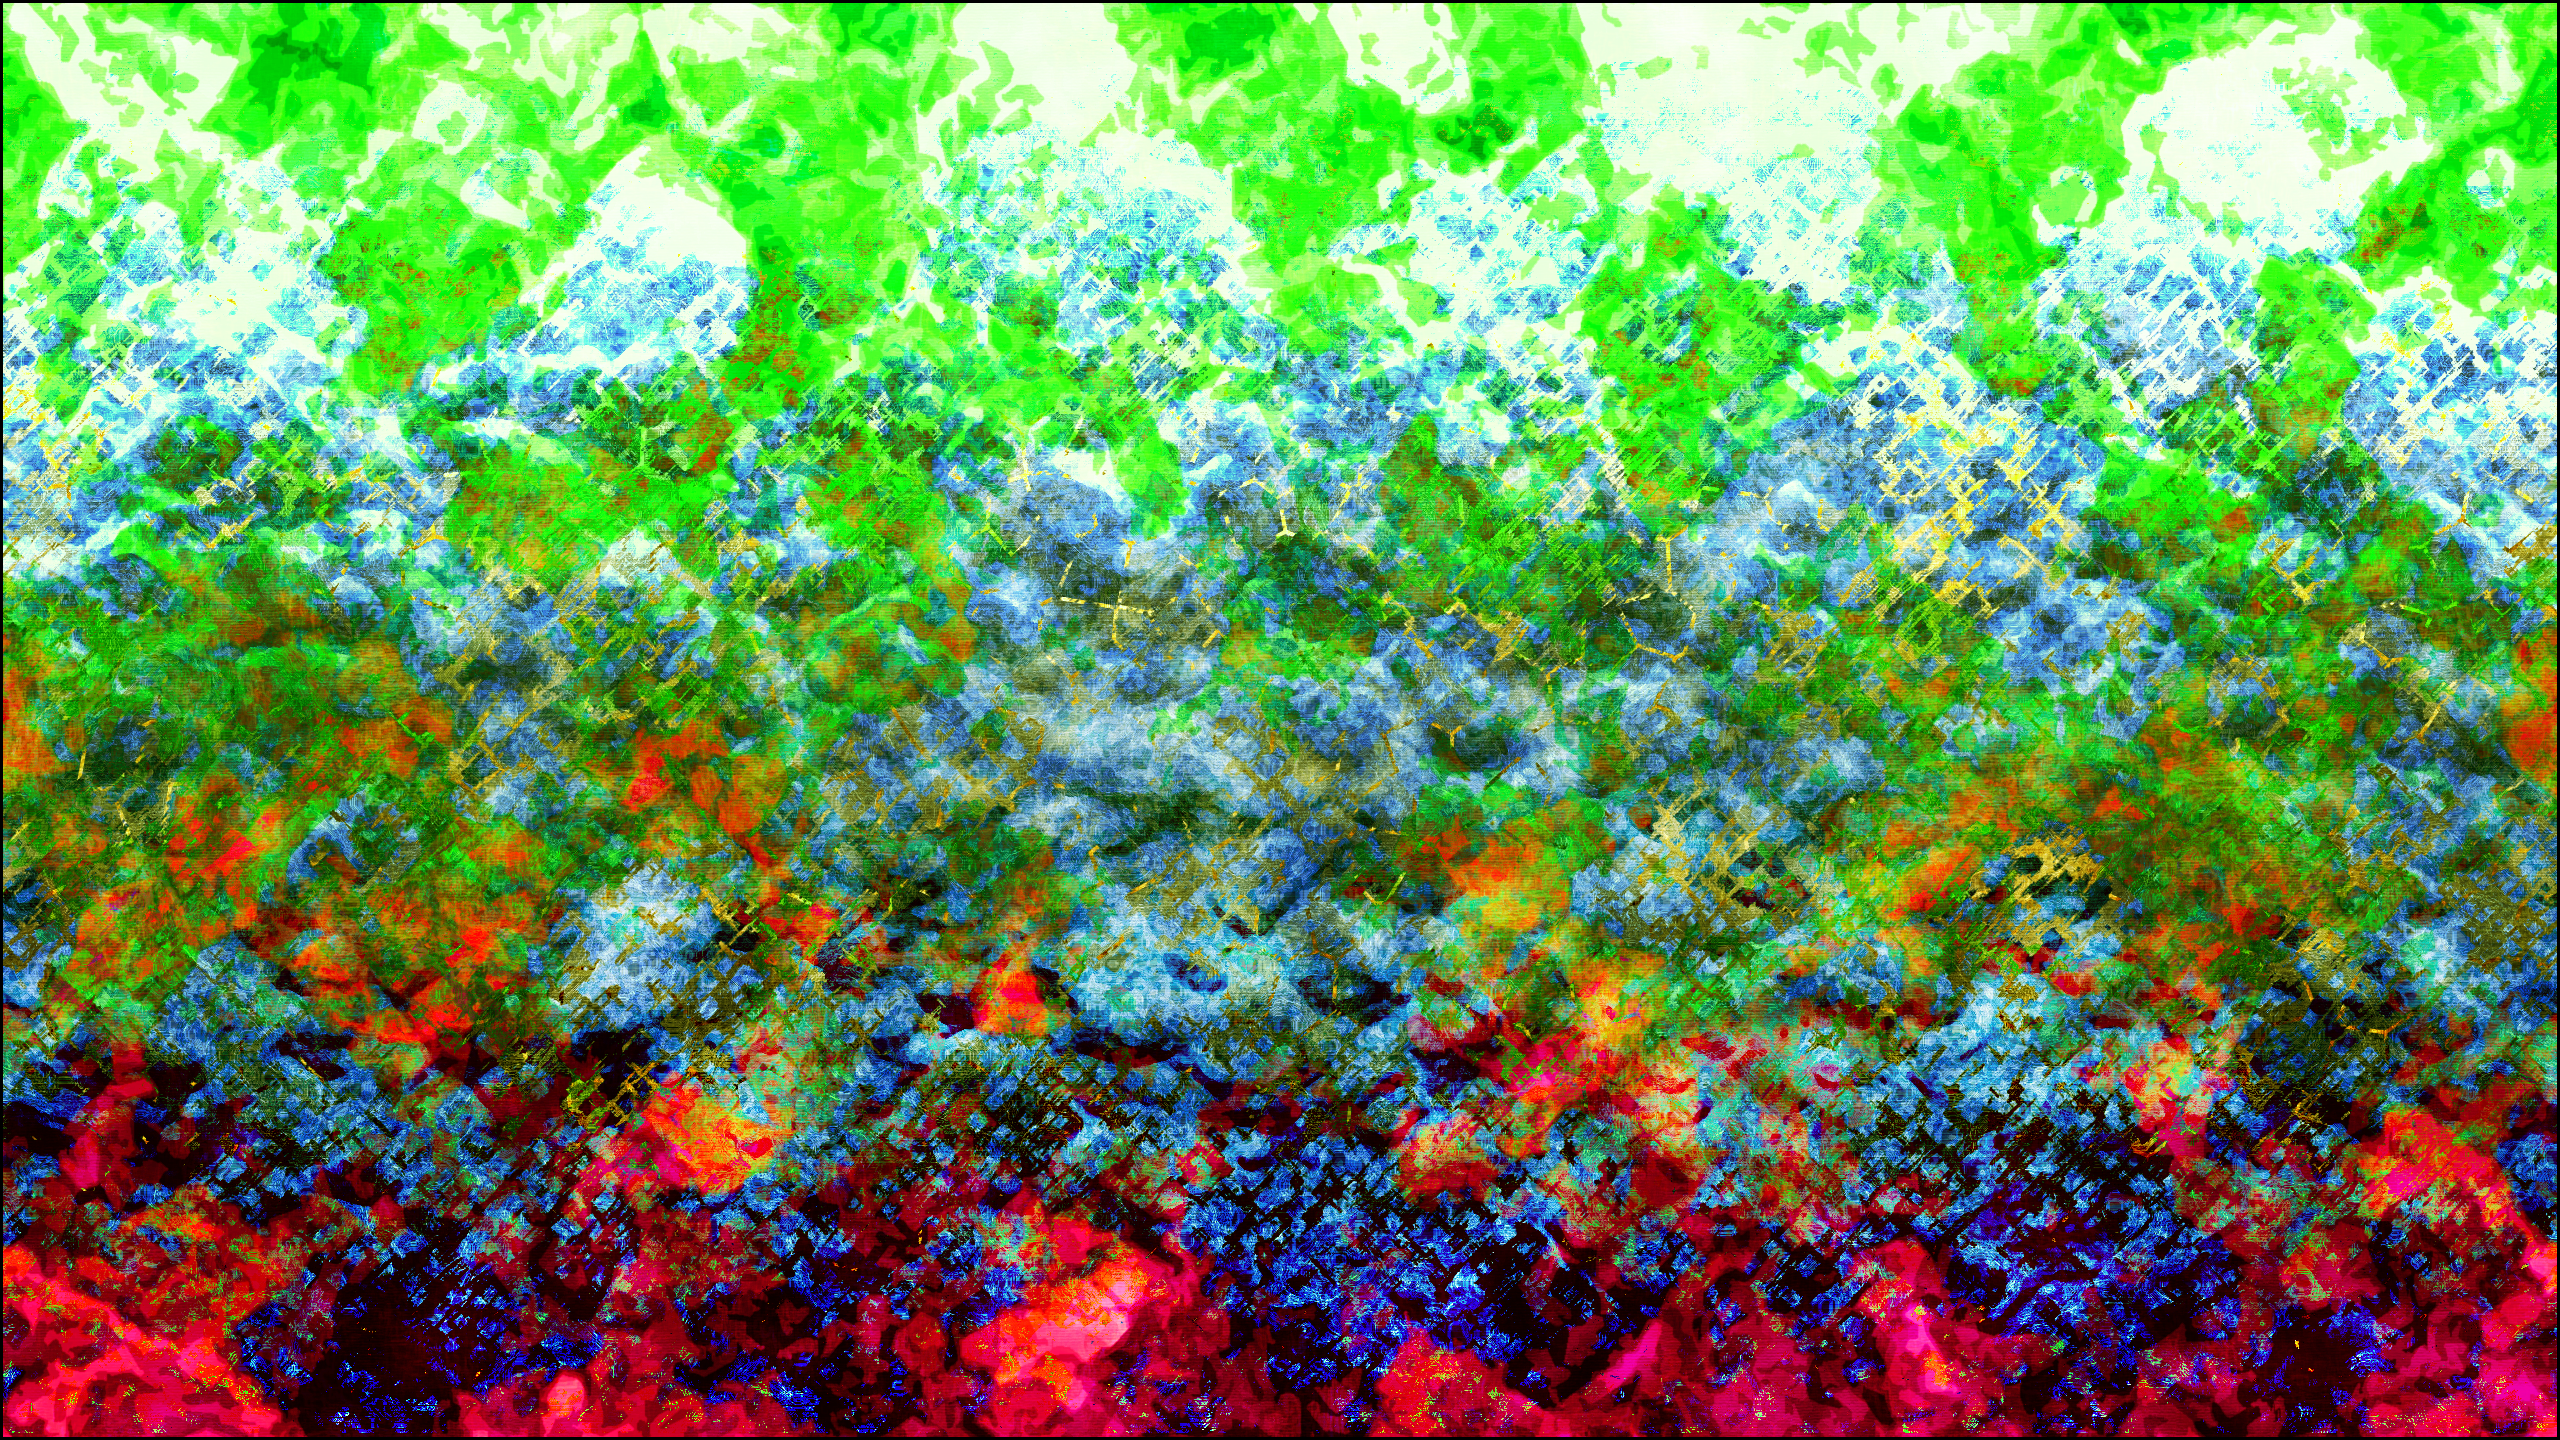 Trippy Digital Art Abstract Psychedelic Brightness 2560x1440